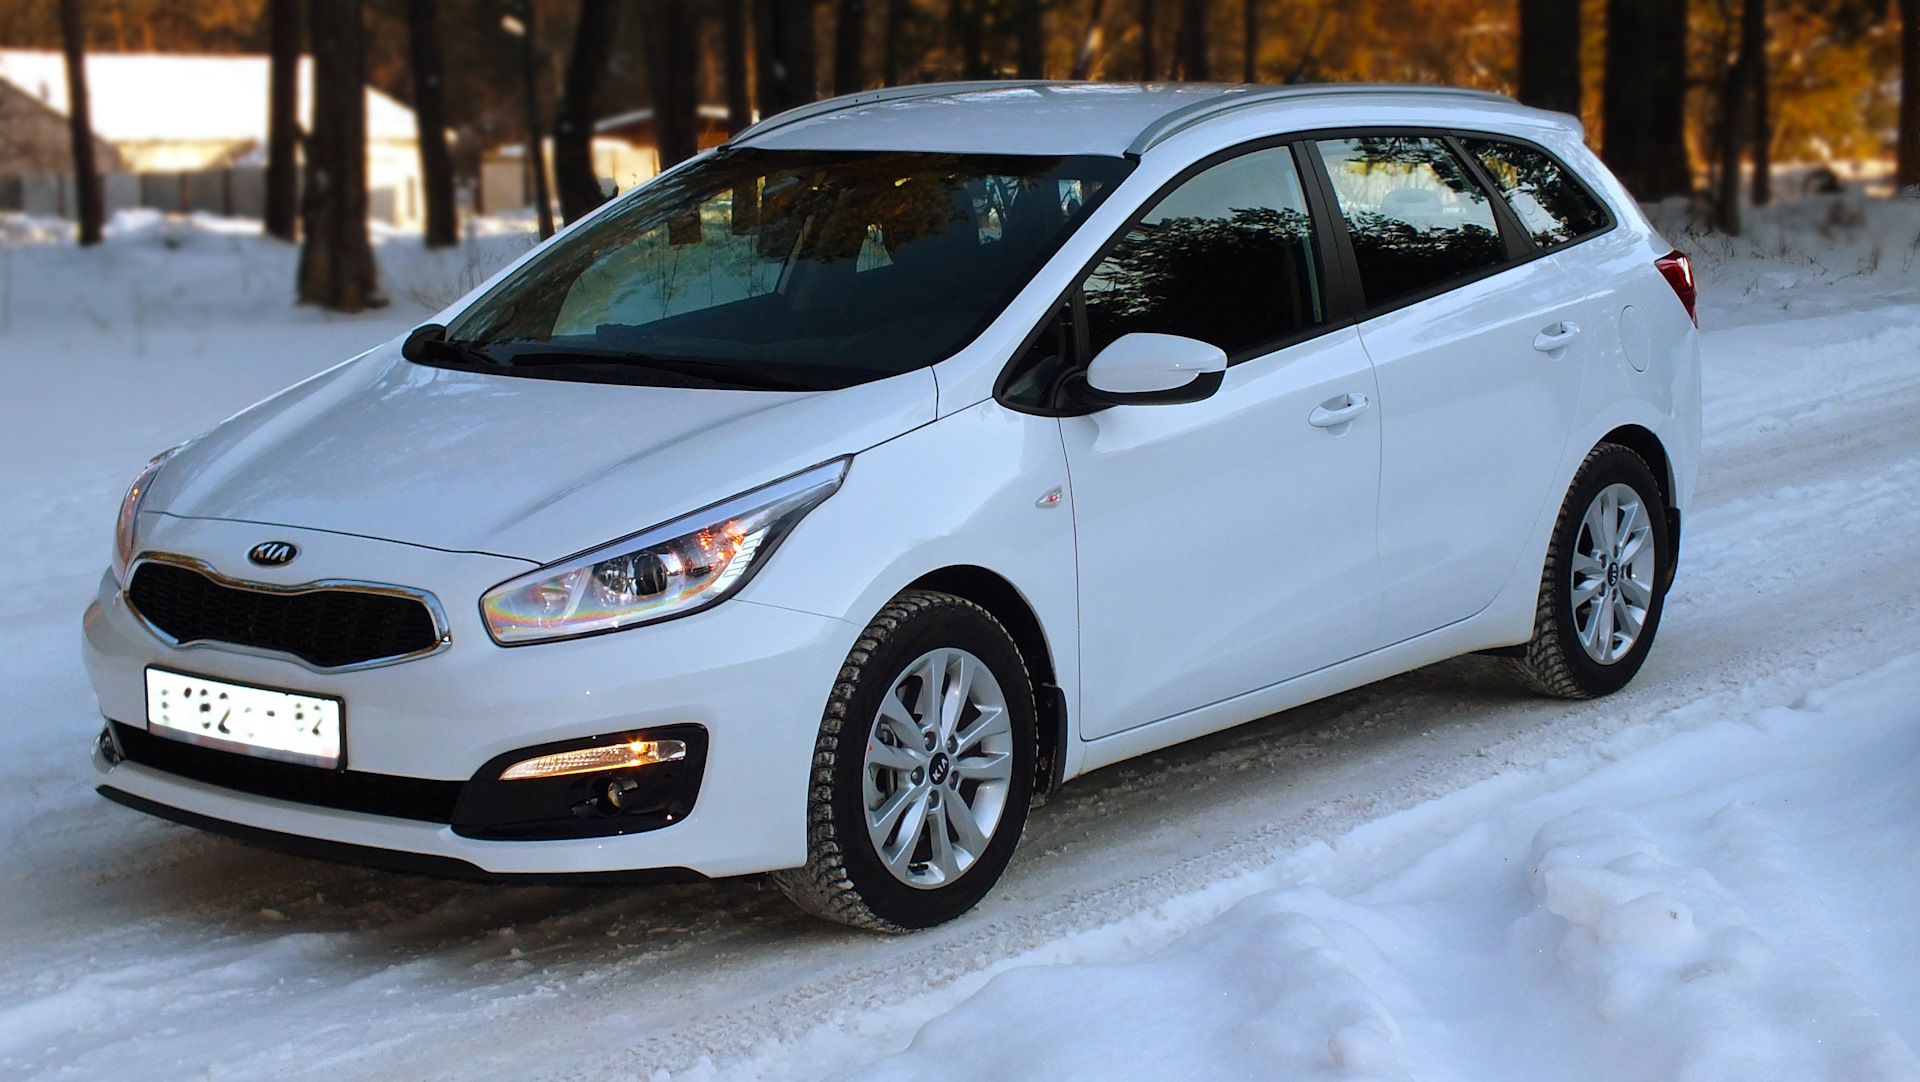 Киа сид отзывы владельцев. Kia Ceed Luxe. Kia Ceed SW Luxe. Kia Ceed Luxe 2021. Kia Ceed Luxe 1.6 at.